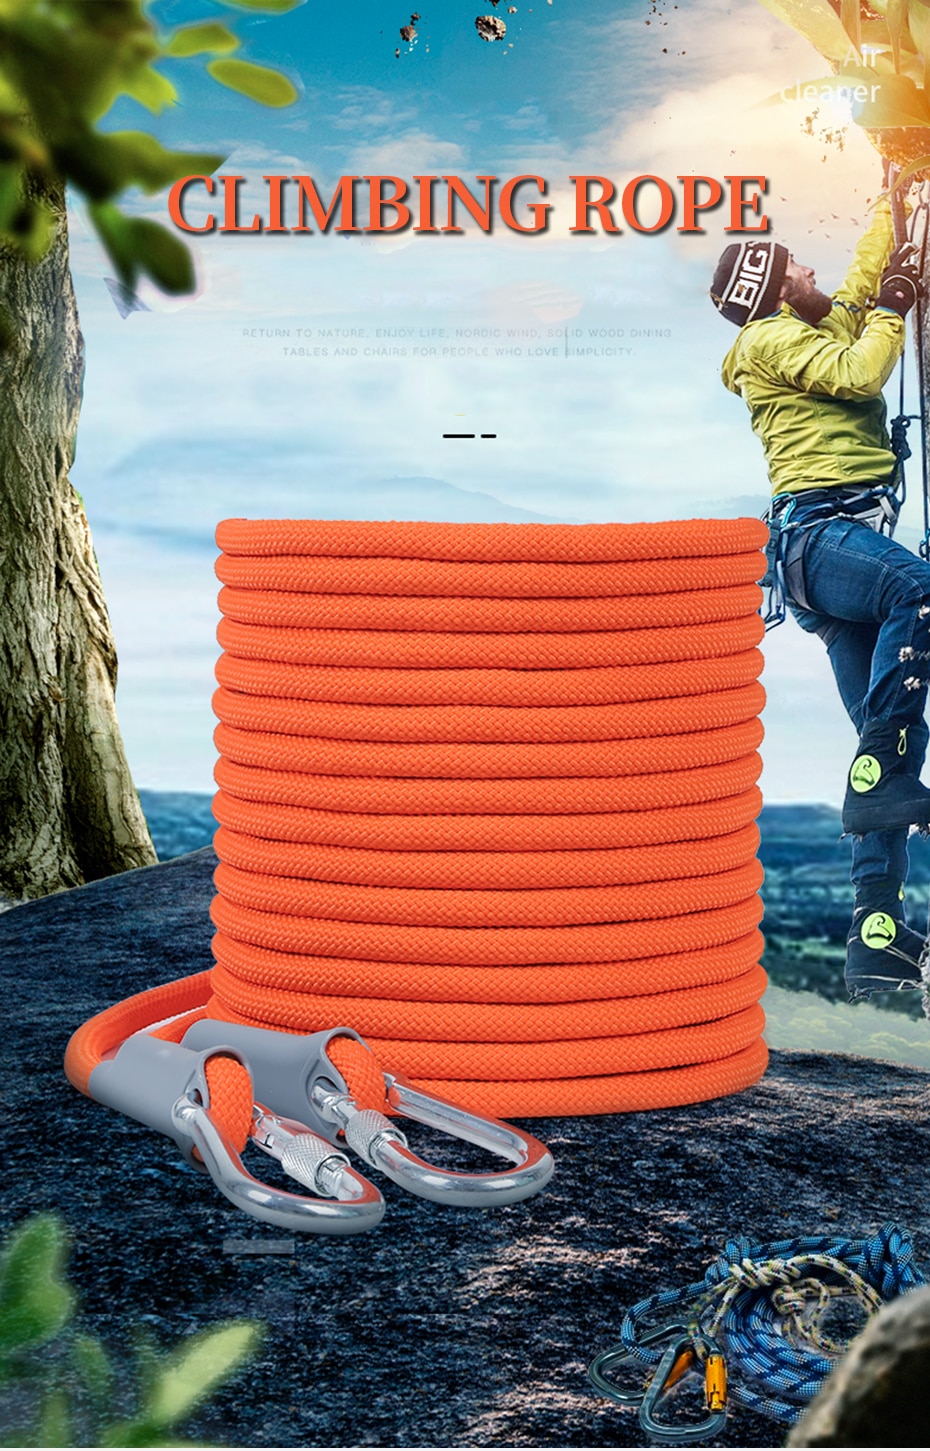 XINDA Professional Rock Climbing Outdoor Trekking Hiking Accessories Floating Rope 10mm Diameter High Strength Cord Safety Rope